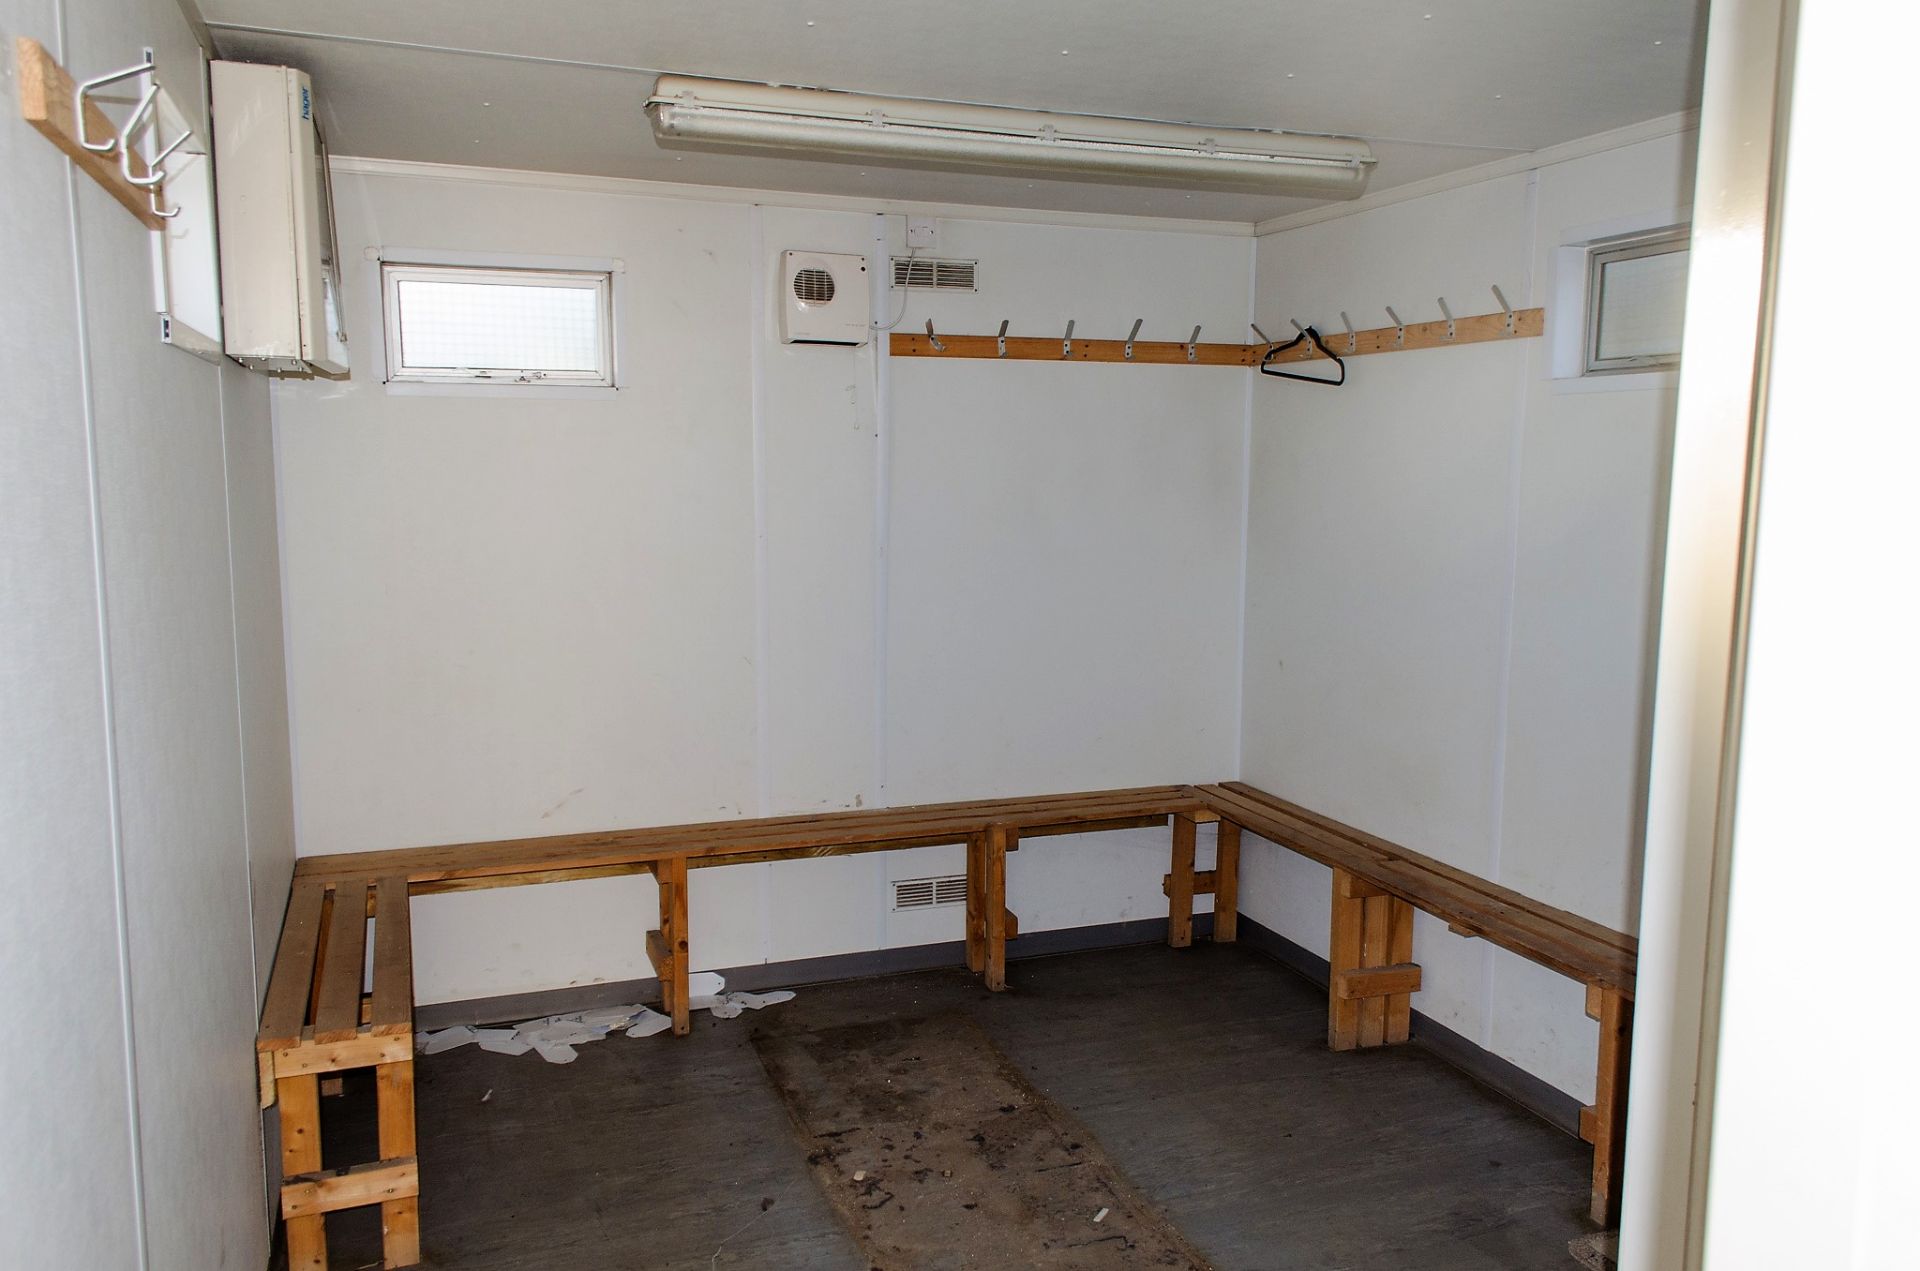 32ft x 9ft steel anti vandal shower site unit Comprising of 8 shower cubicles & changing area c/w - Image 6 of 8